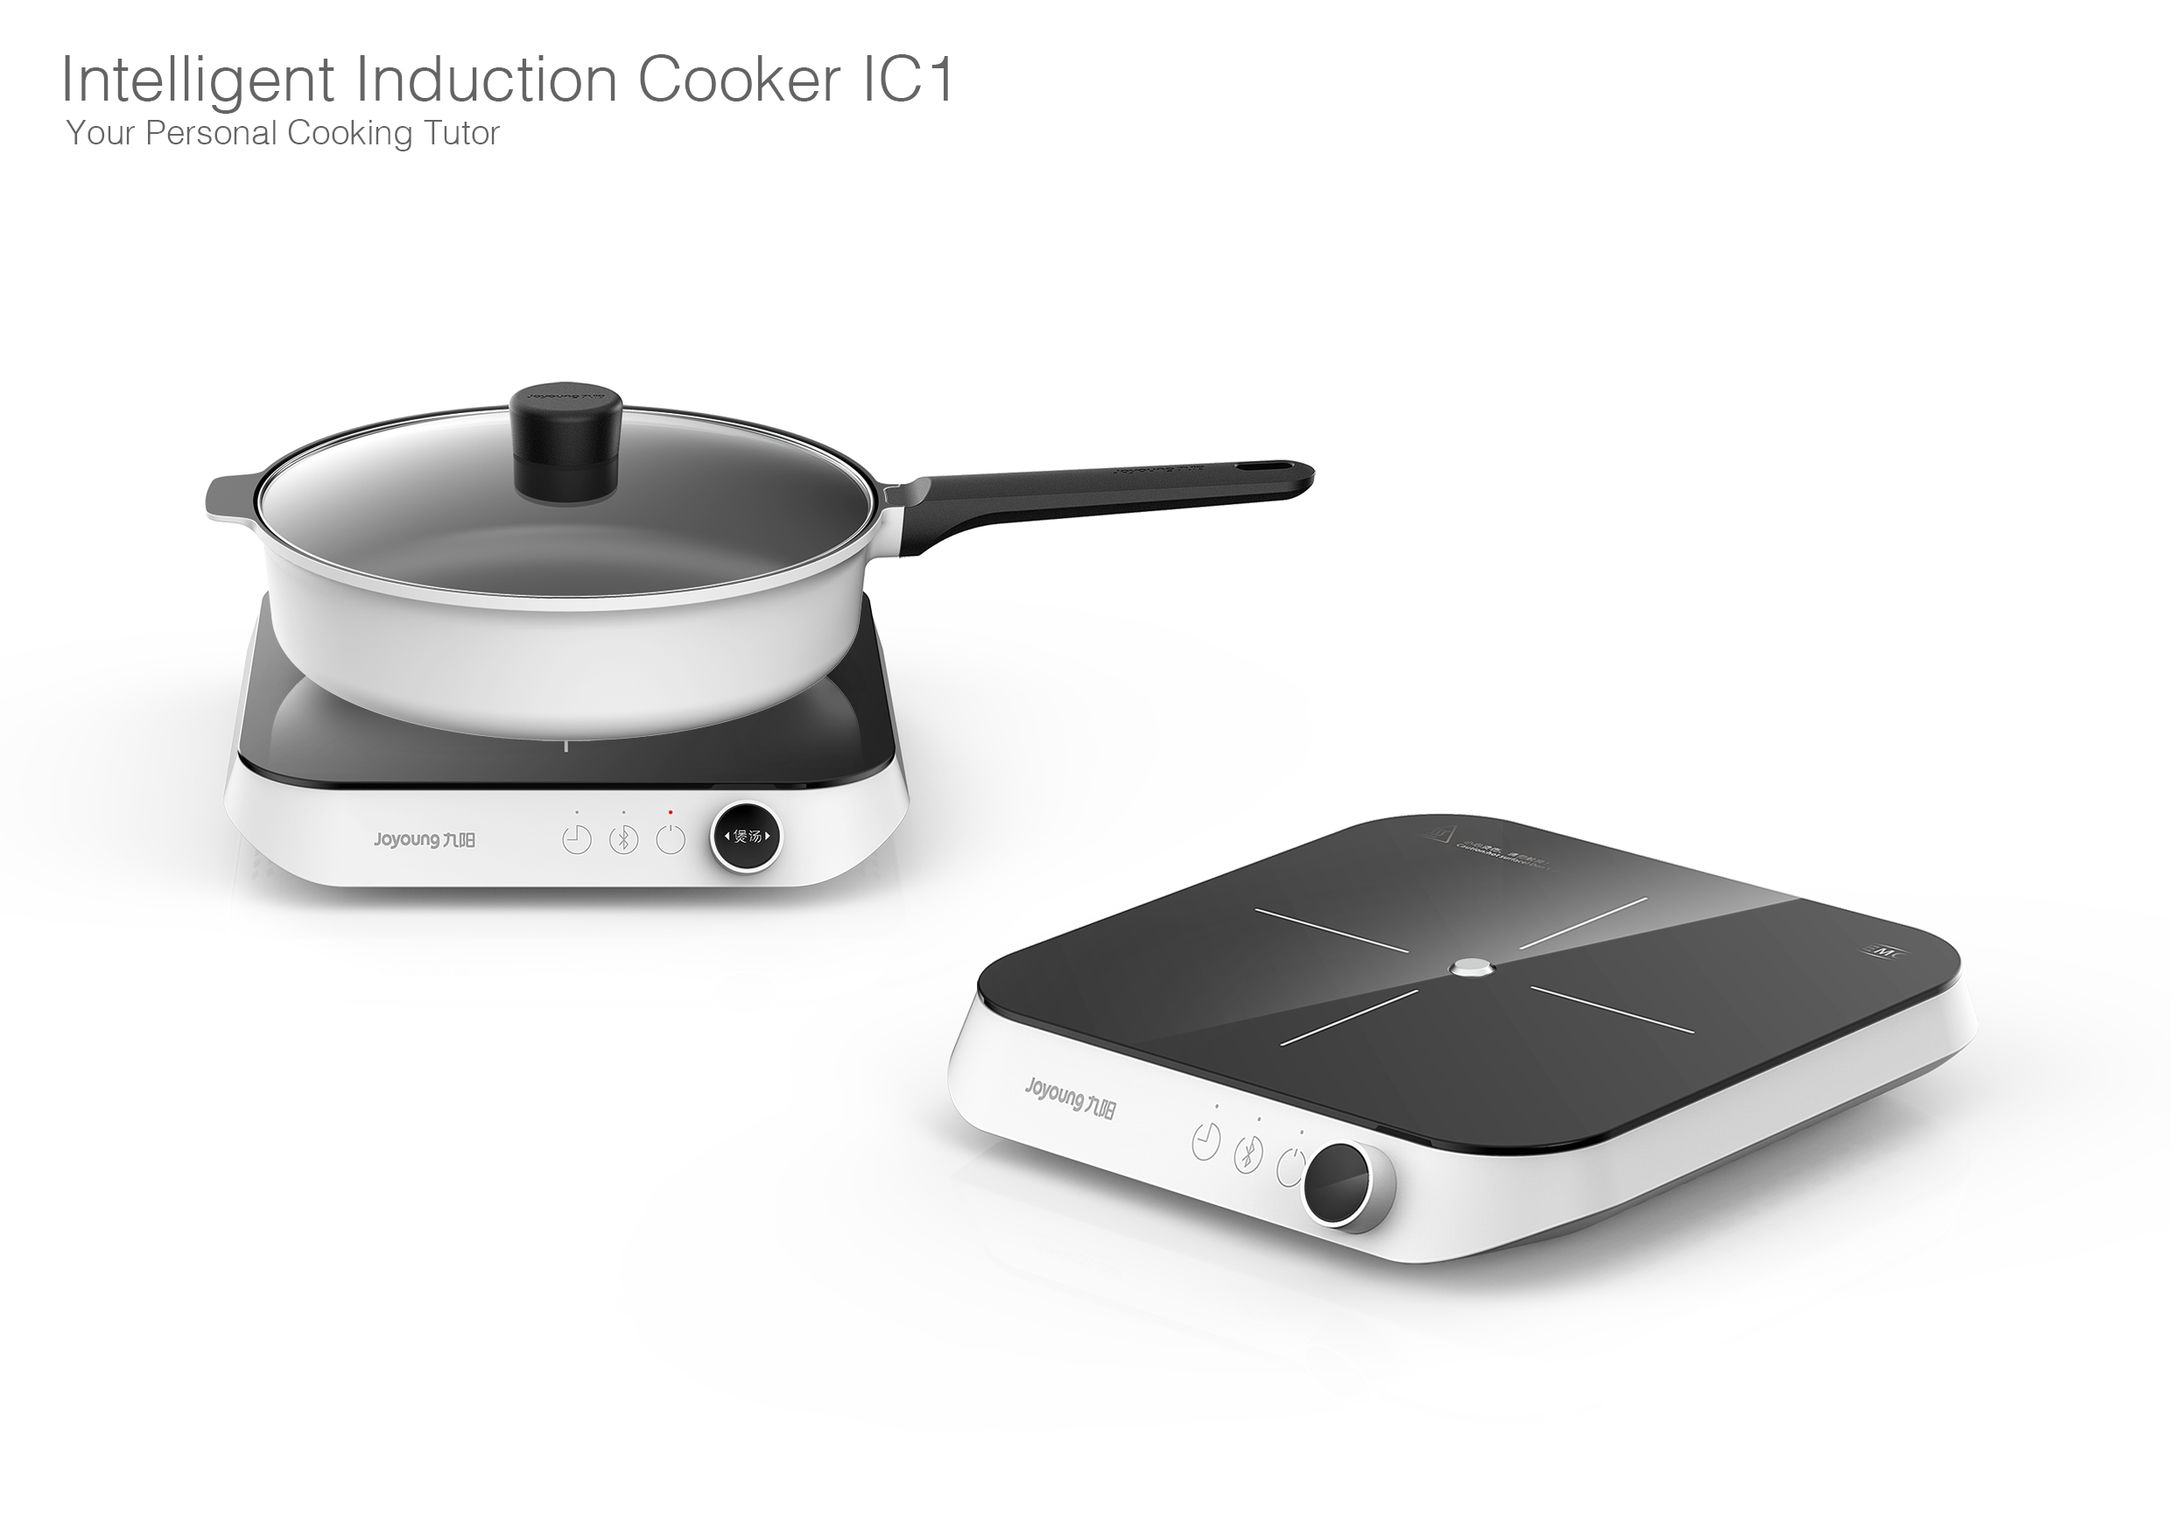 Intelligent Induction Cooker IC1